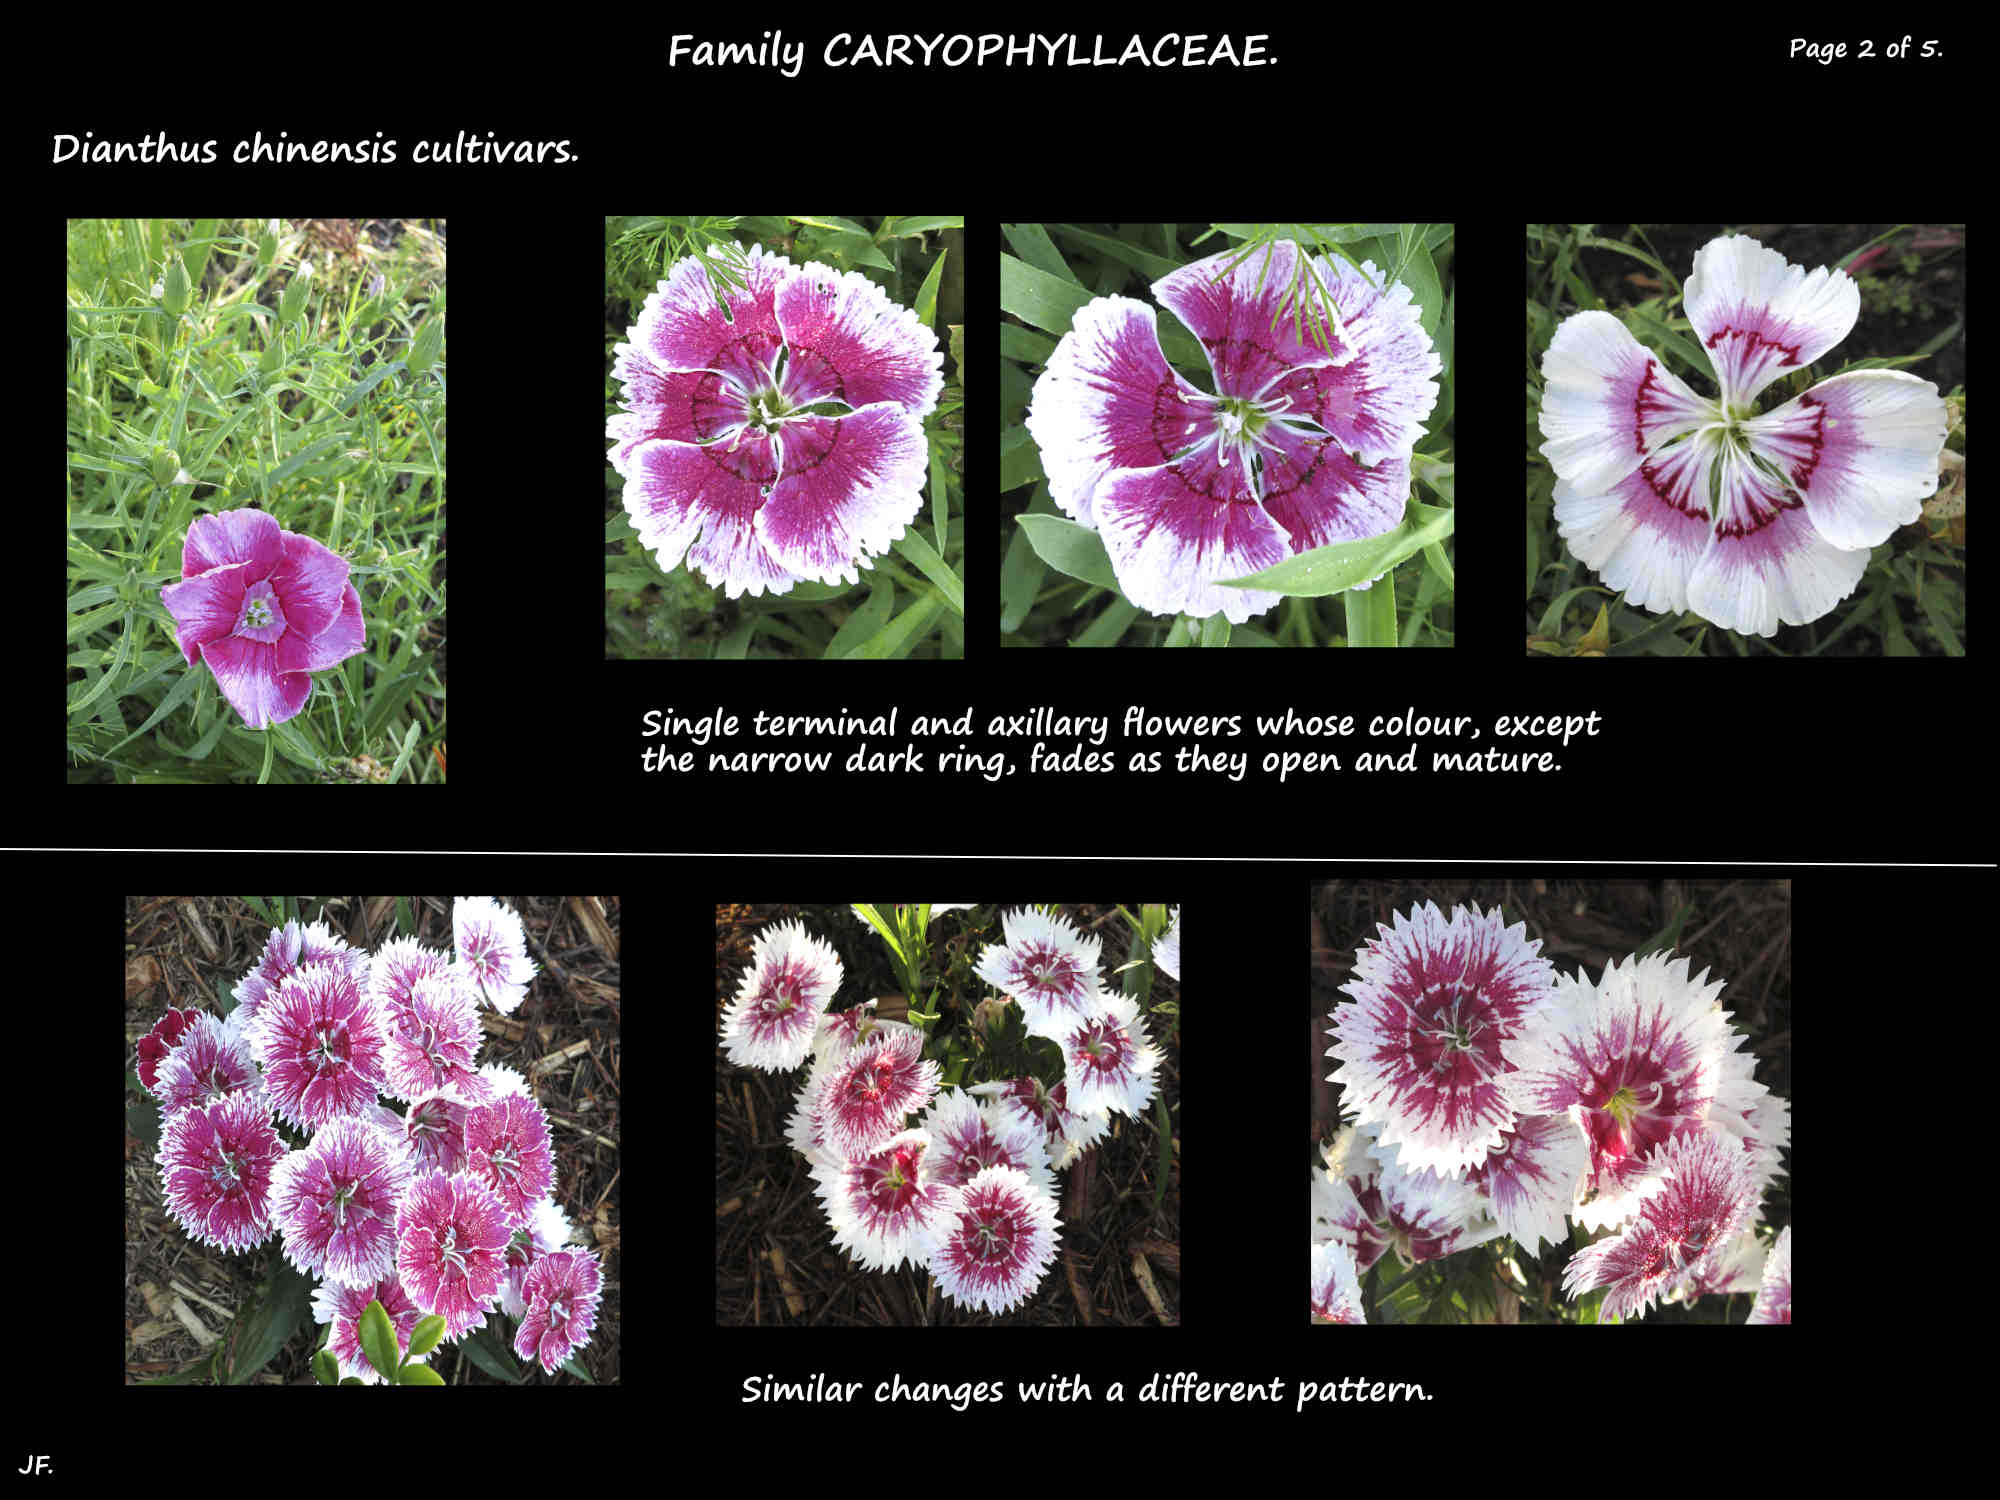 2 Two Dianthus chinensis cultivars